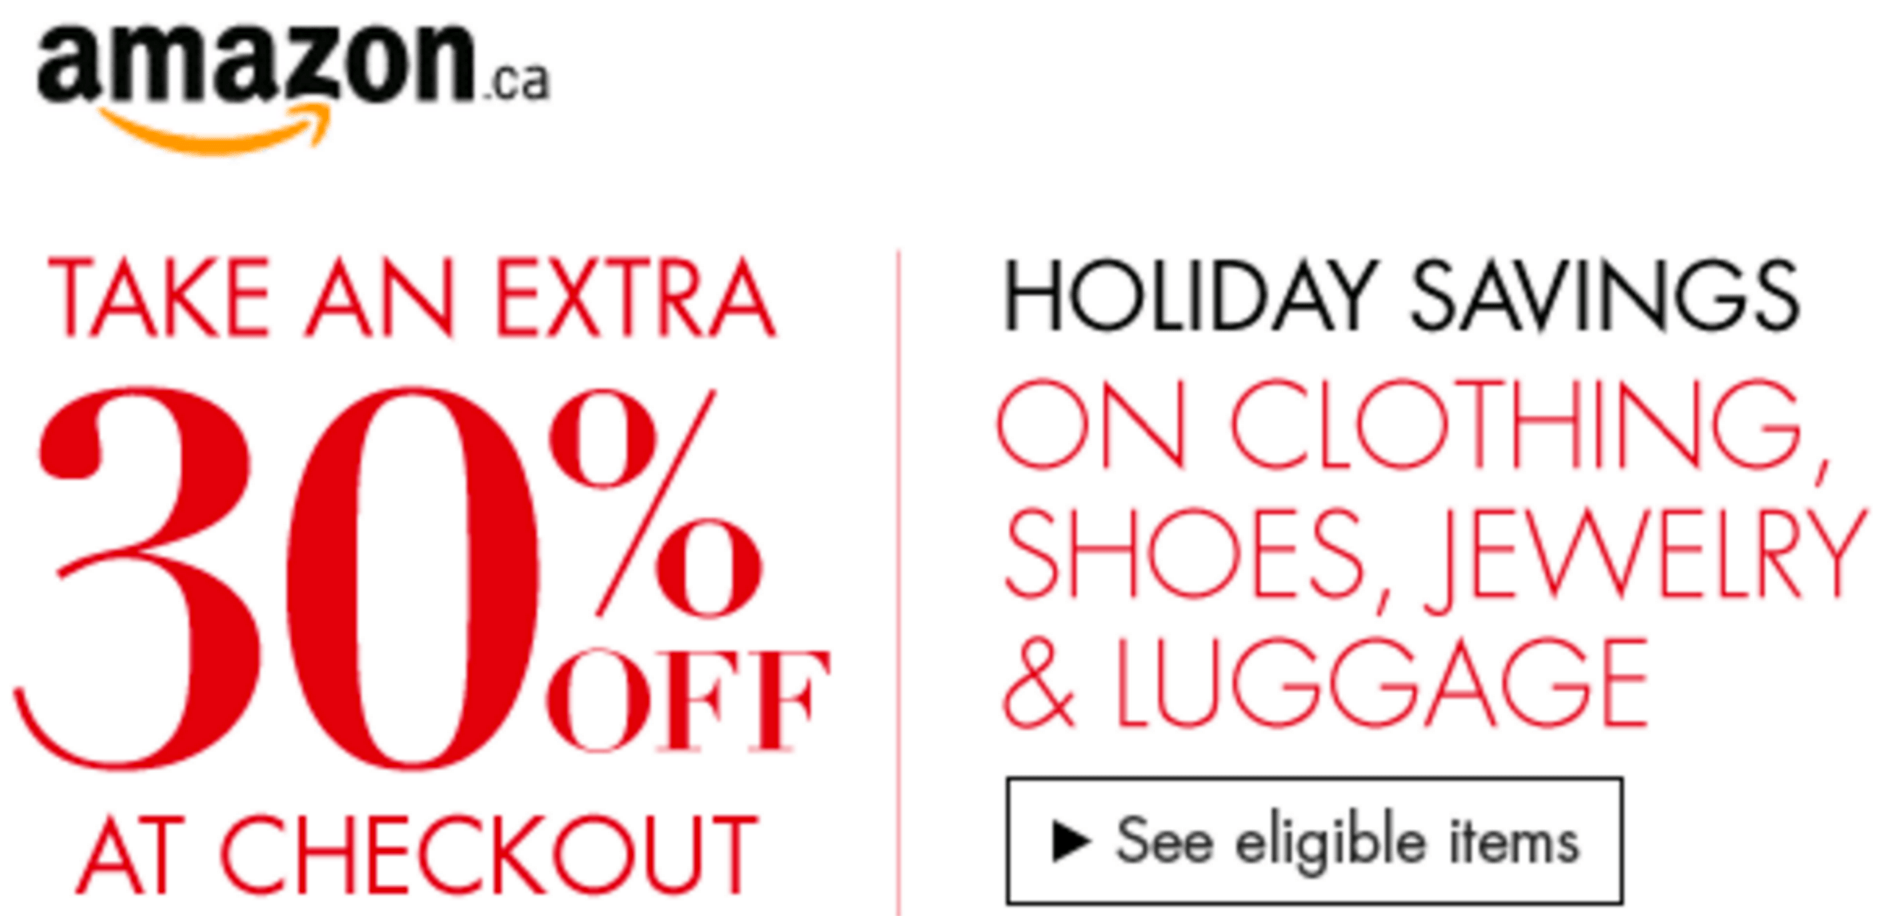 amazon-canada-holiday-savings-event-save-an-extra-30-off-at-checkout